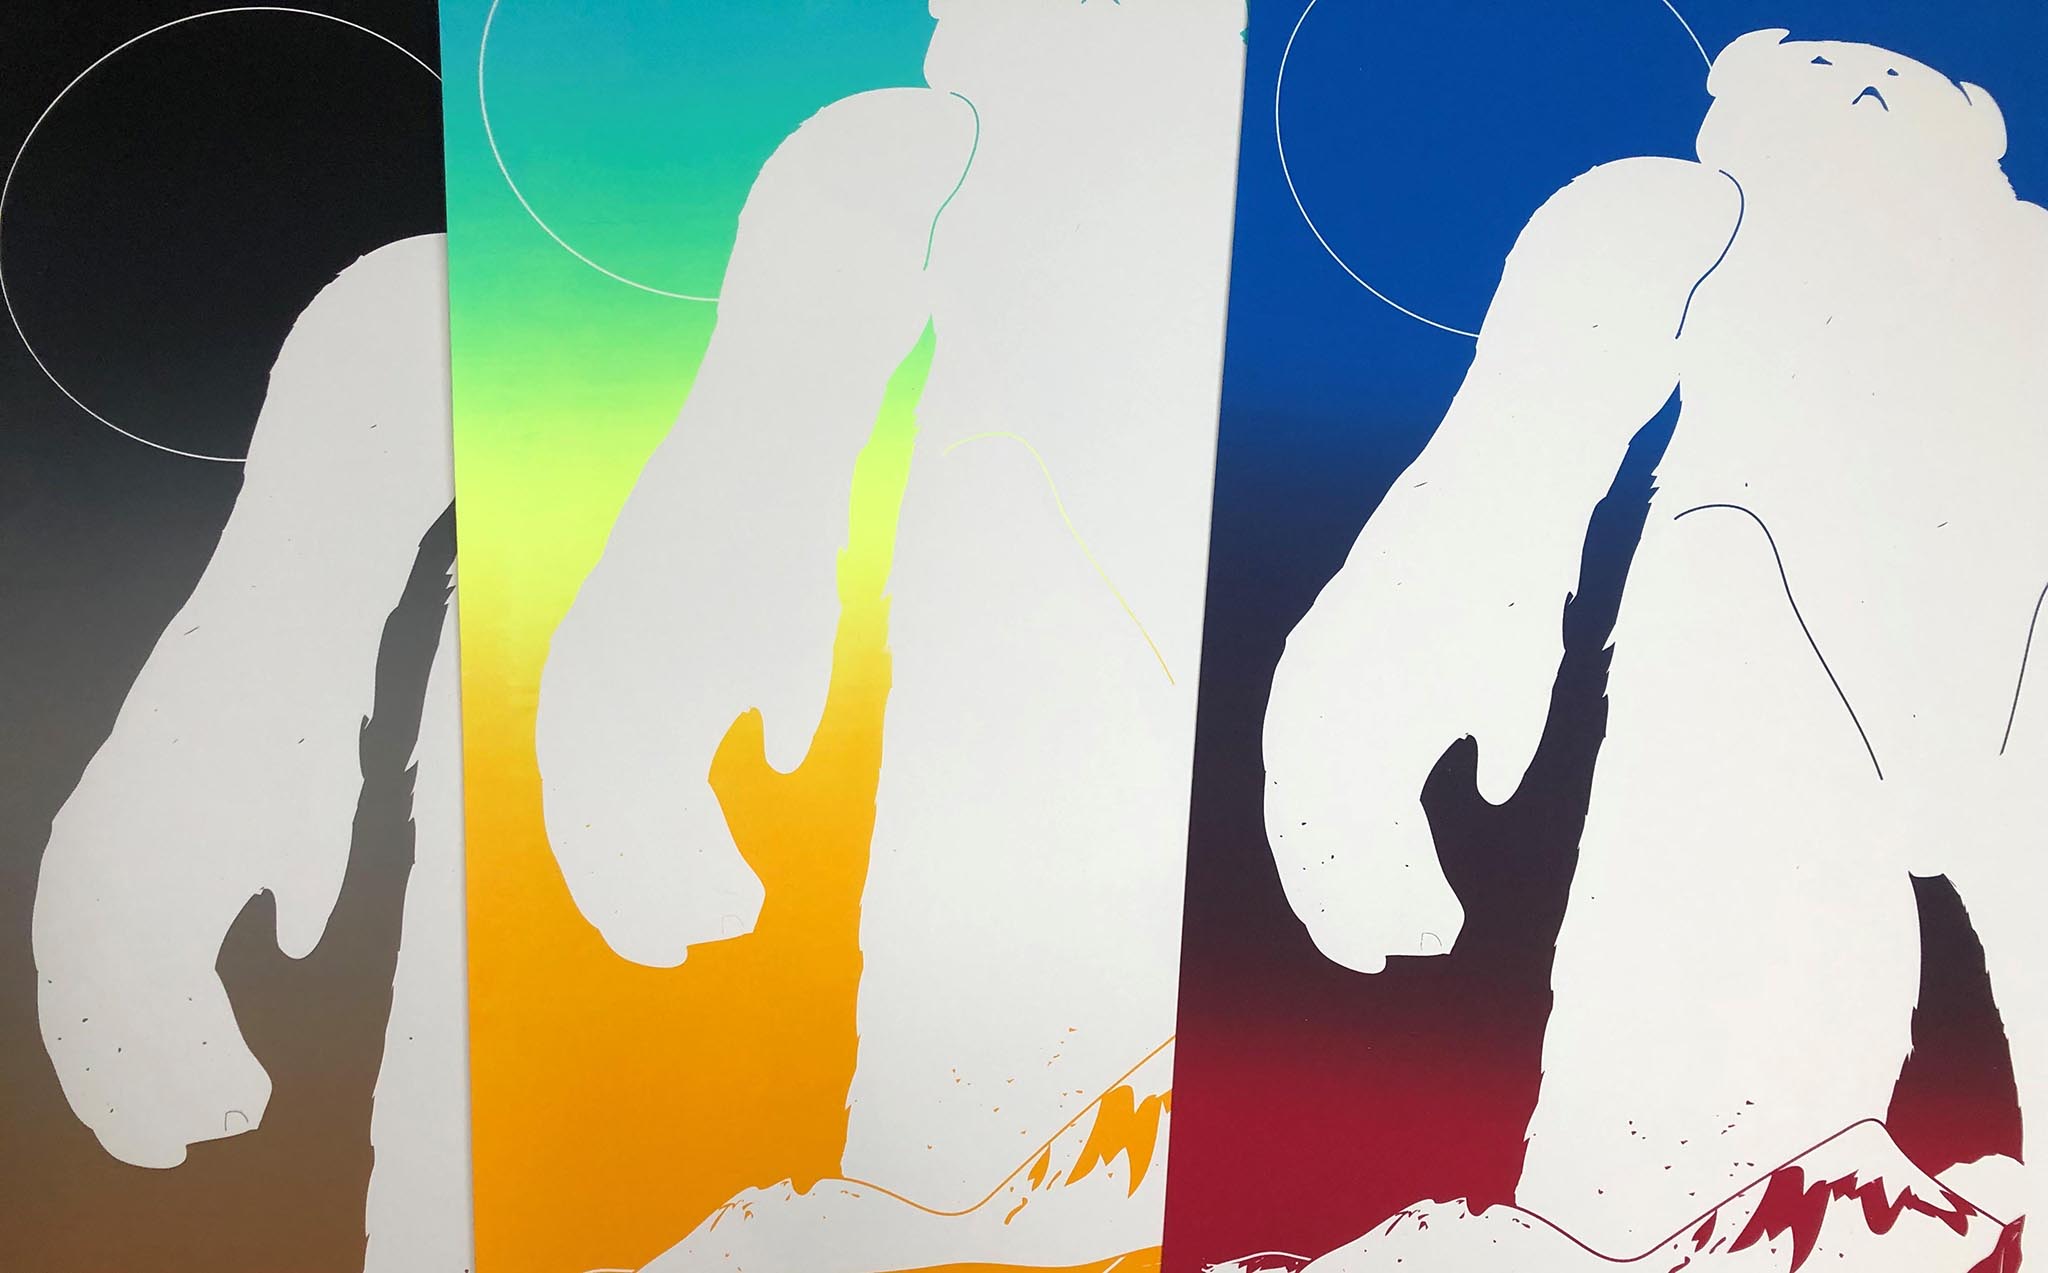 Phil Ashcroft, Gradient Yet, detail, screenprint, 77.5 x 59cm, 2020, available in 5 colourways